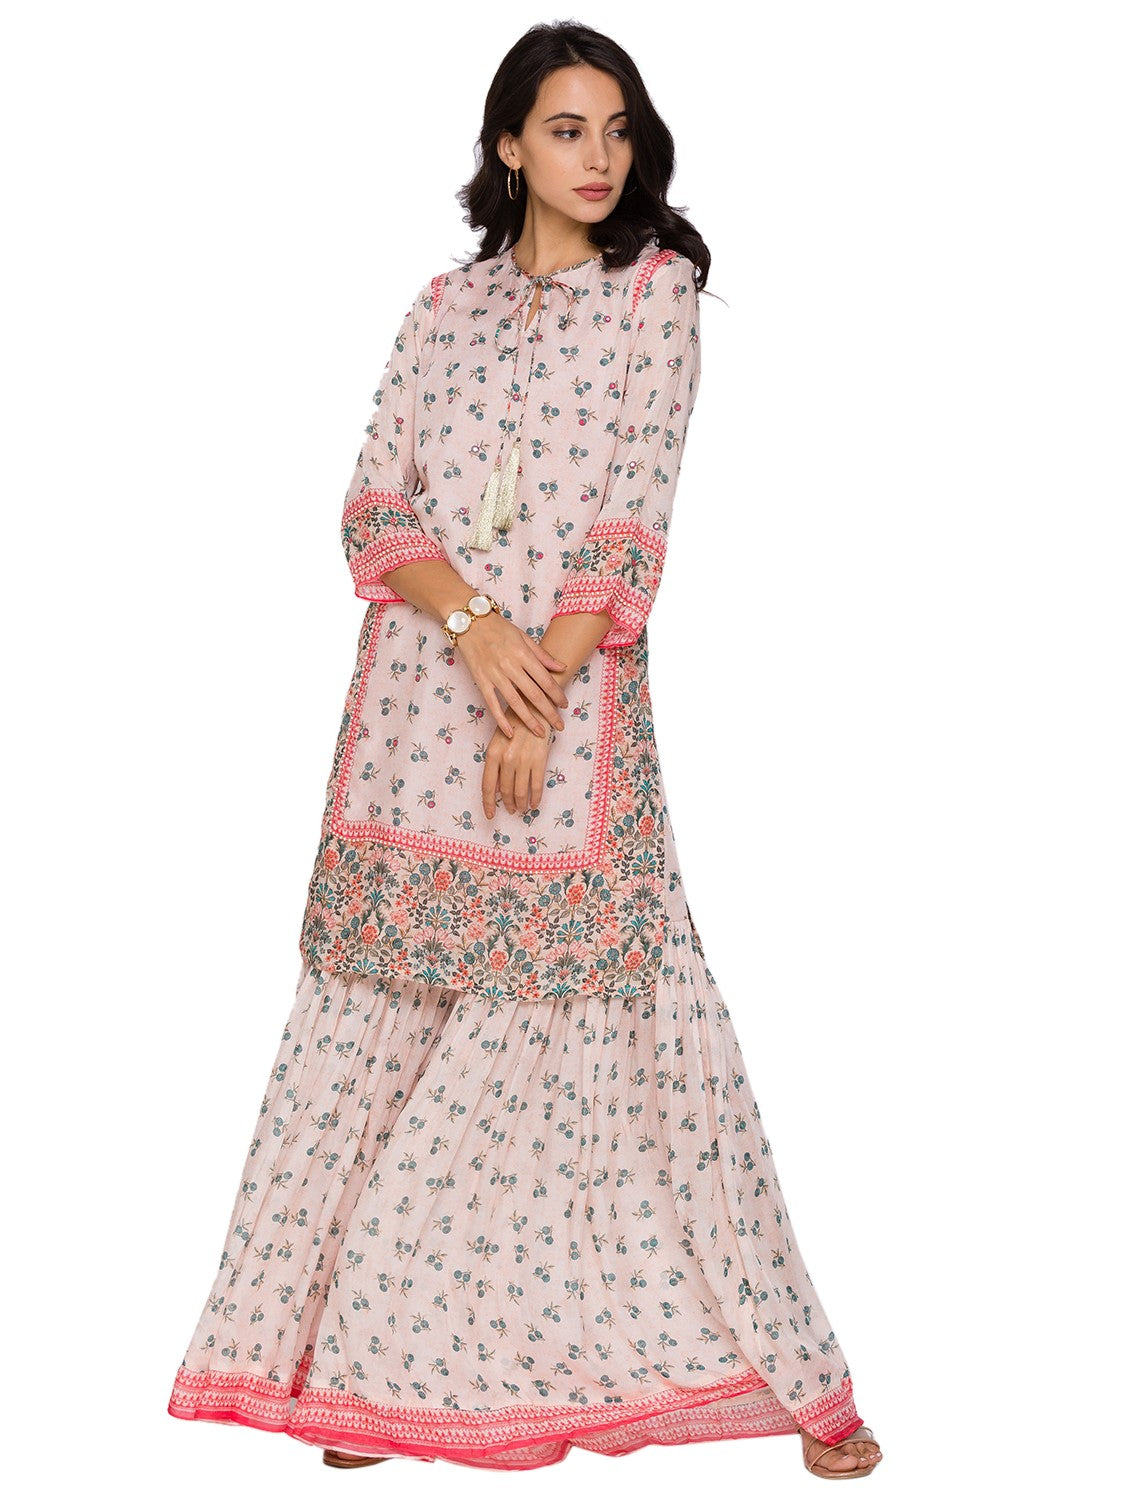 Eden Printed Kurta With Neck Tie Up Paired With Sharara Pants Embellished With Pearls